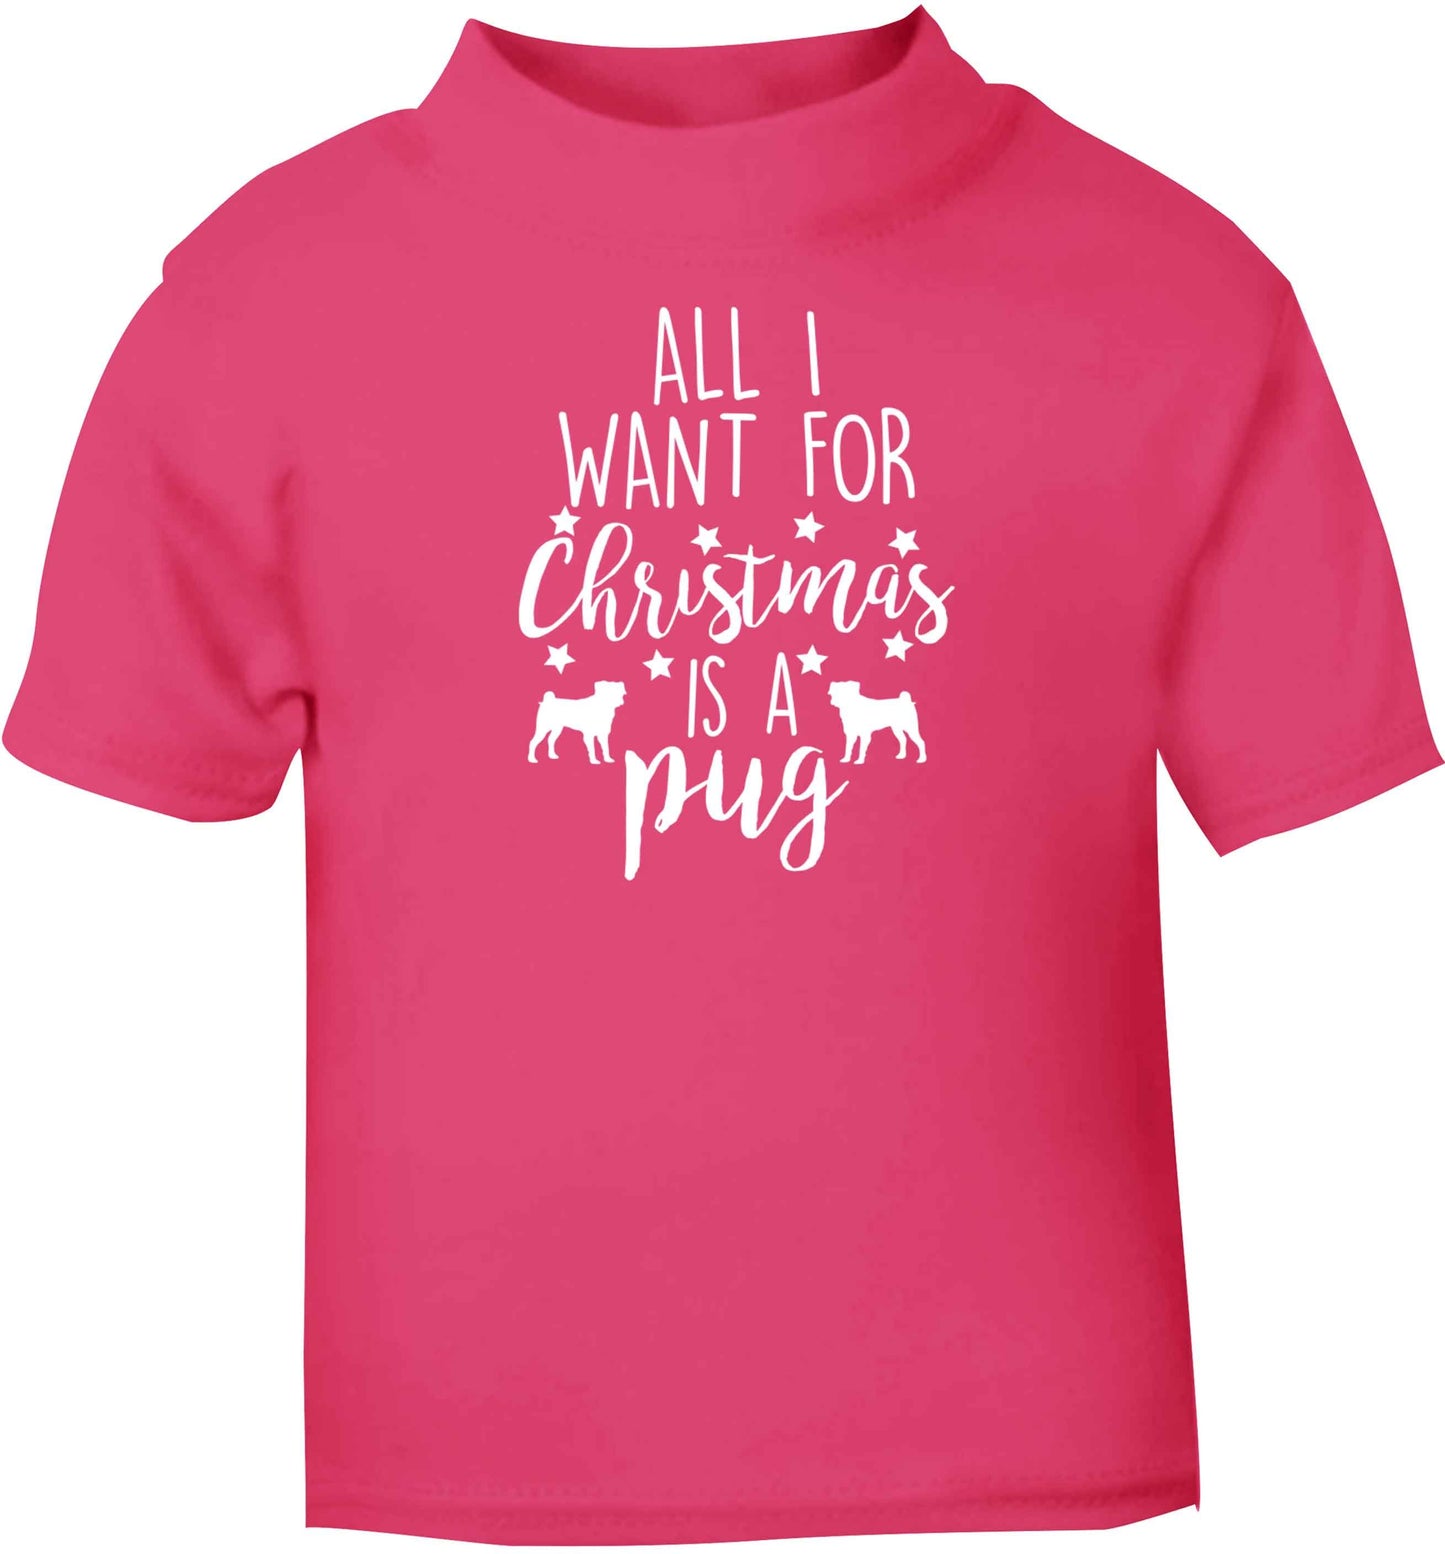 All I want for Christmas is a pug pink baby toddler Tshirt 2 Years